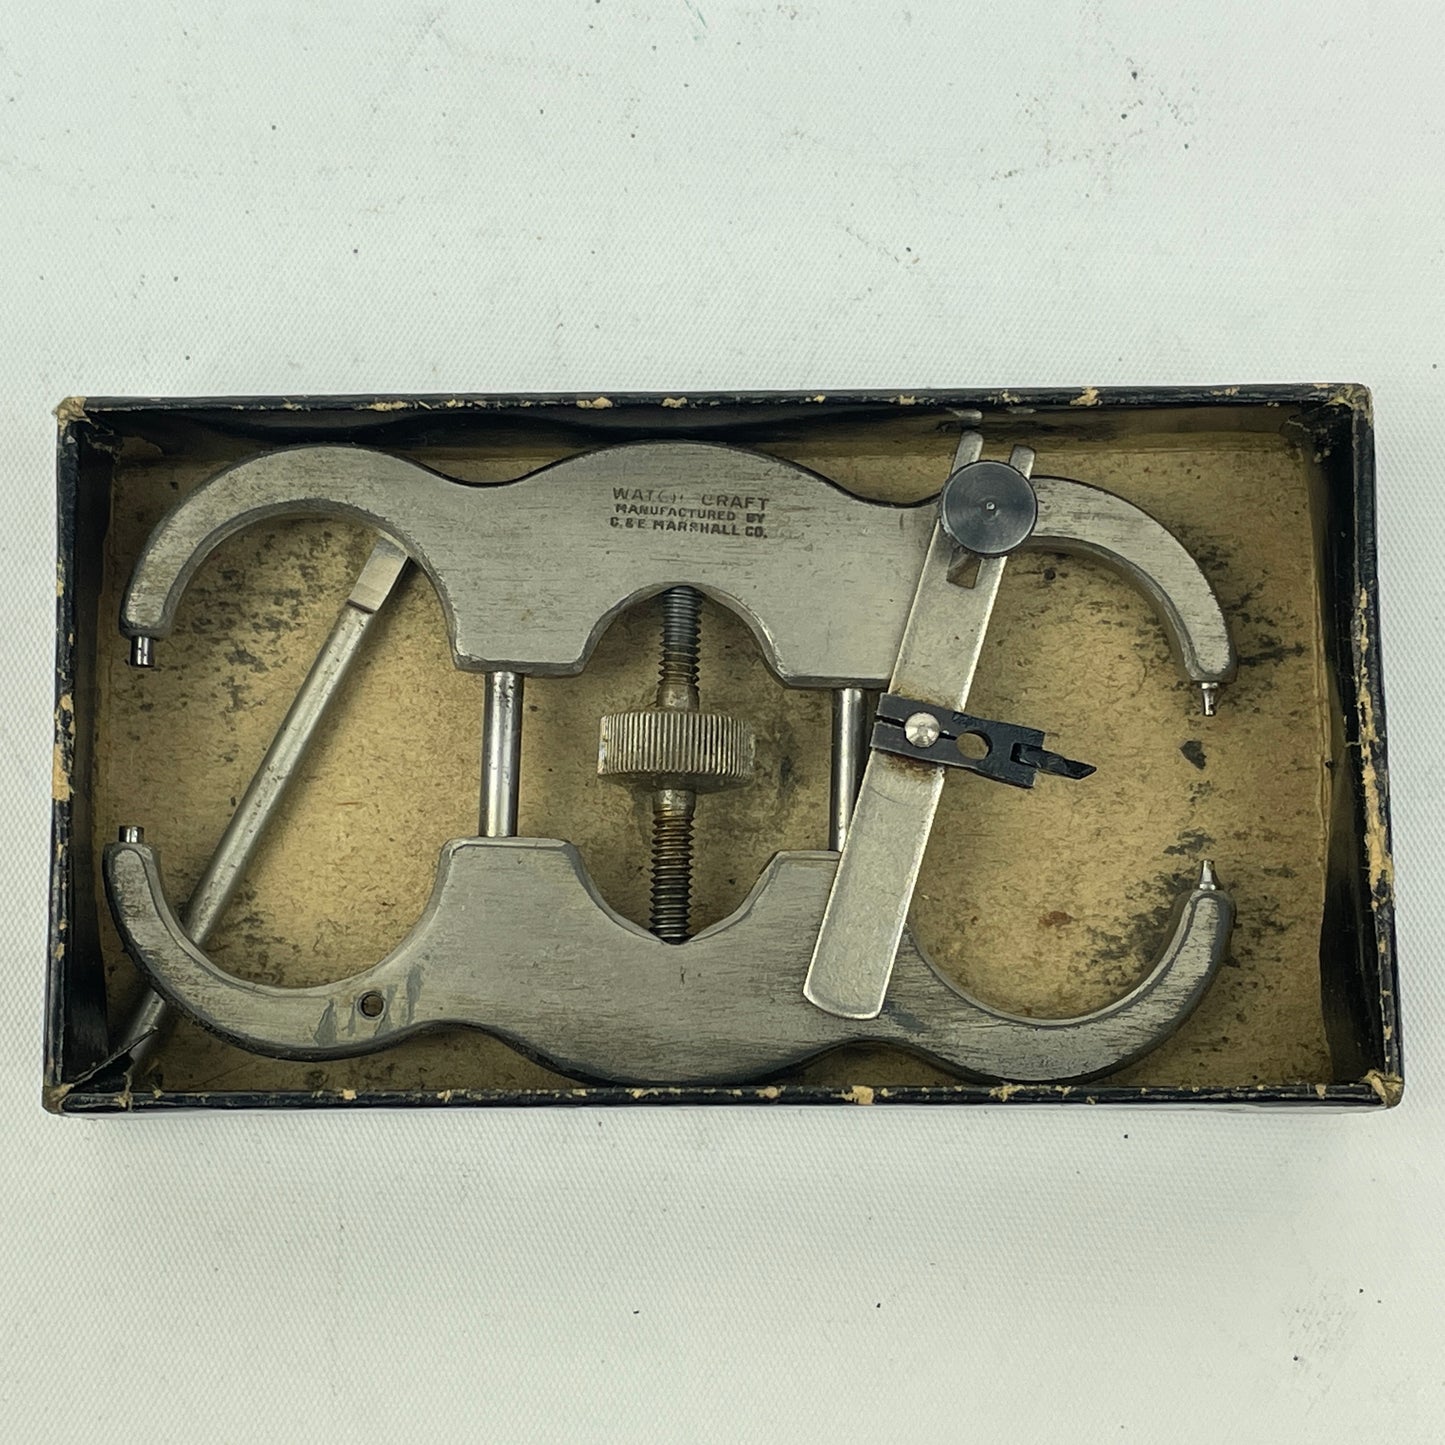 Lot 13- Watchmaker’s “WATCH-CRAFT” C. & E. Marshall Boxed Caliper